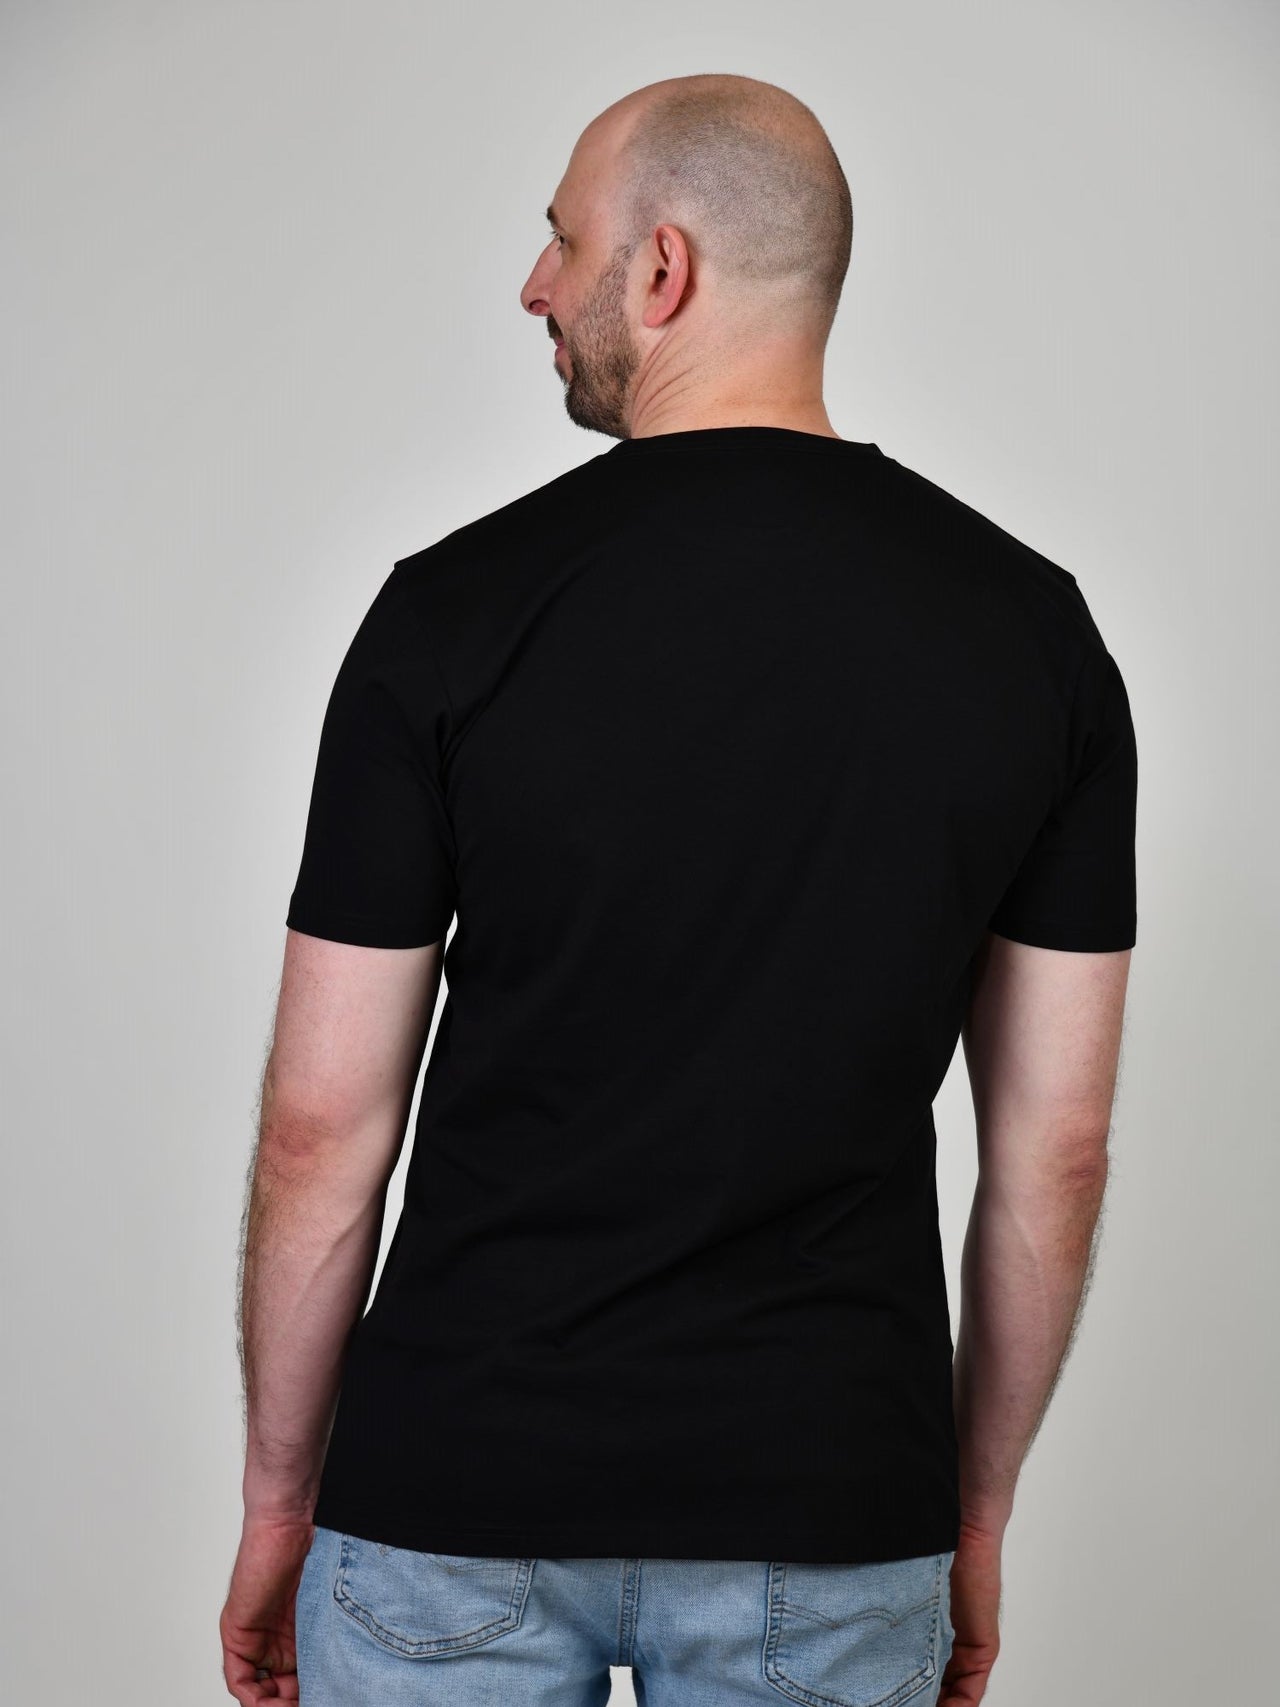 Tall Slim T-Shirt | Available In White, Black + 9 More